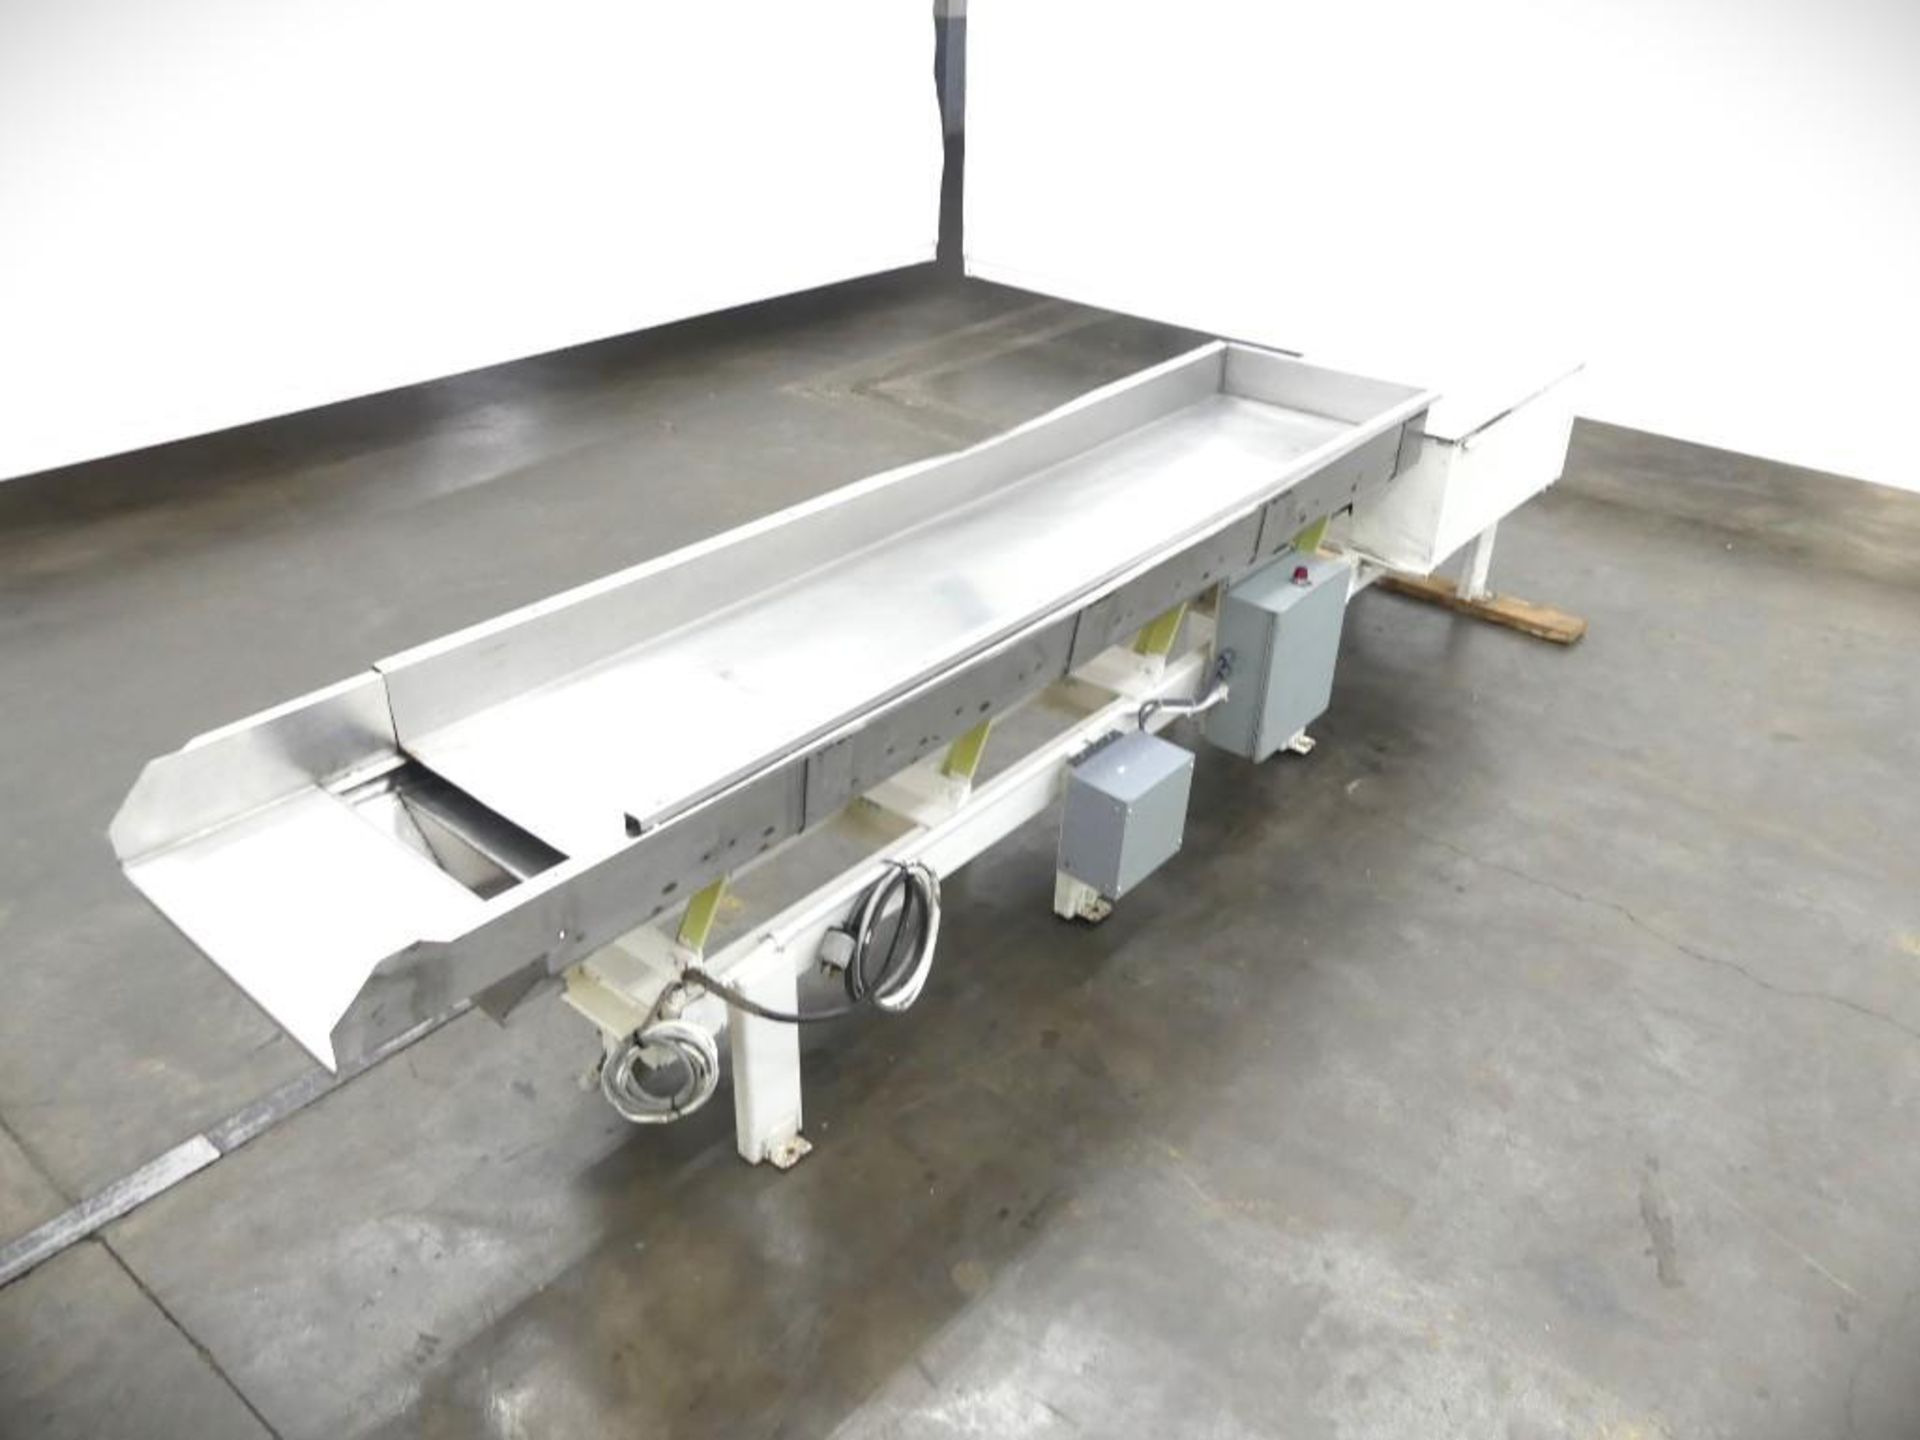 8'L x 24"W Linear Vibratory Feeder - Image 3 of 23